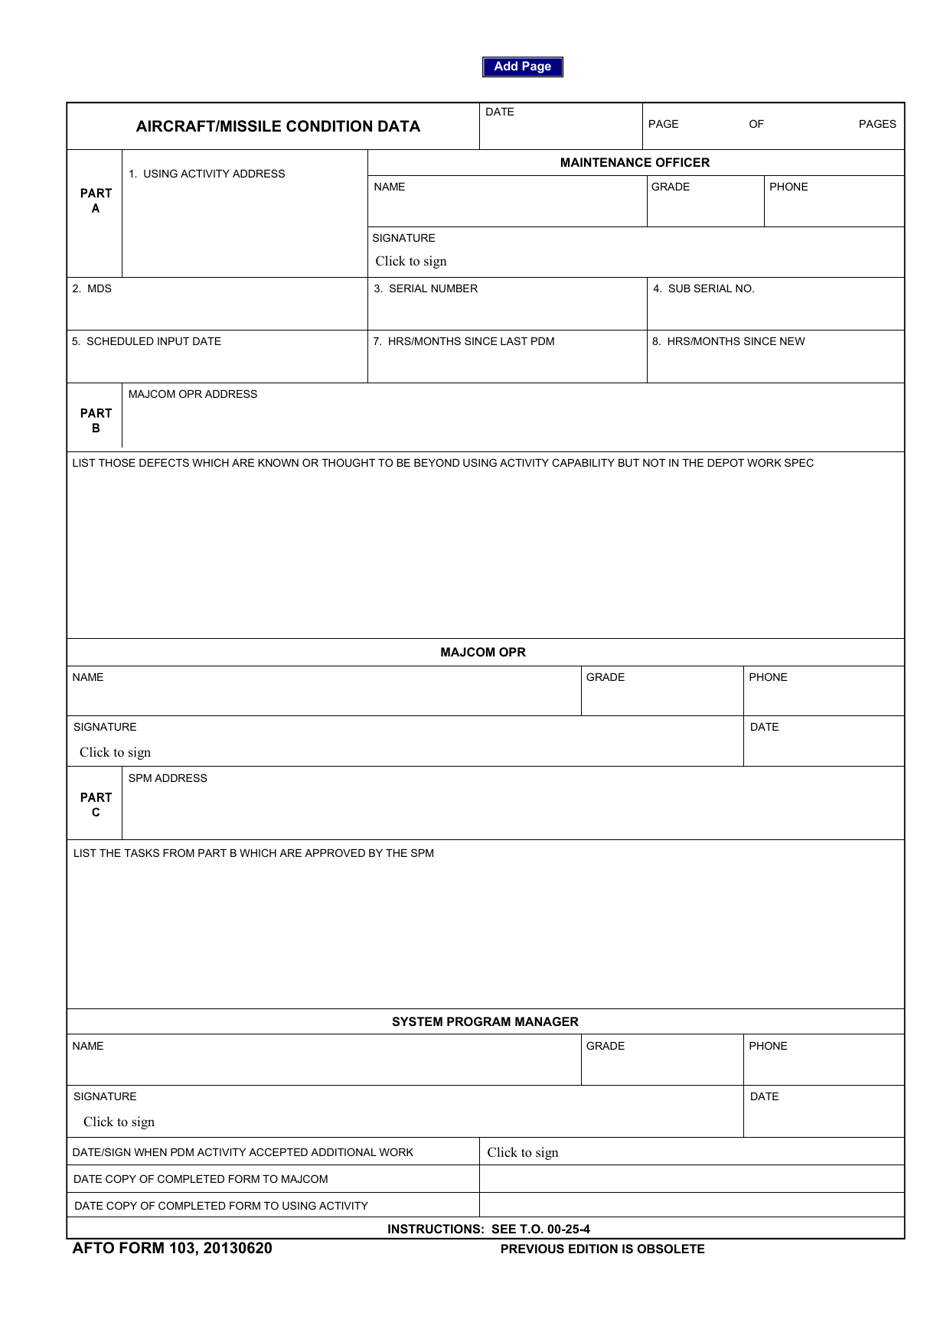 AFTO Form 103 Aircraft / Missile Condition Data, Page 1